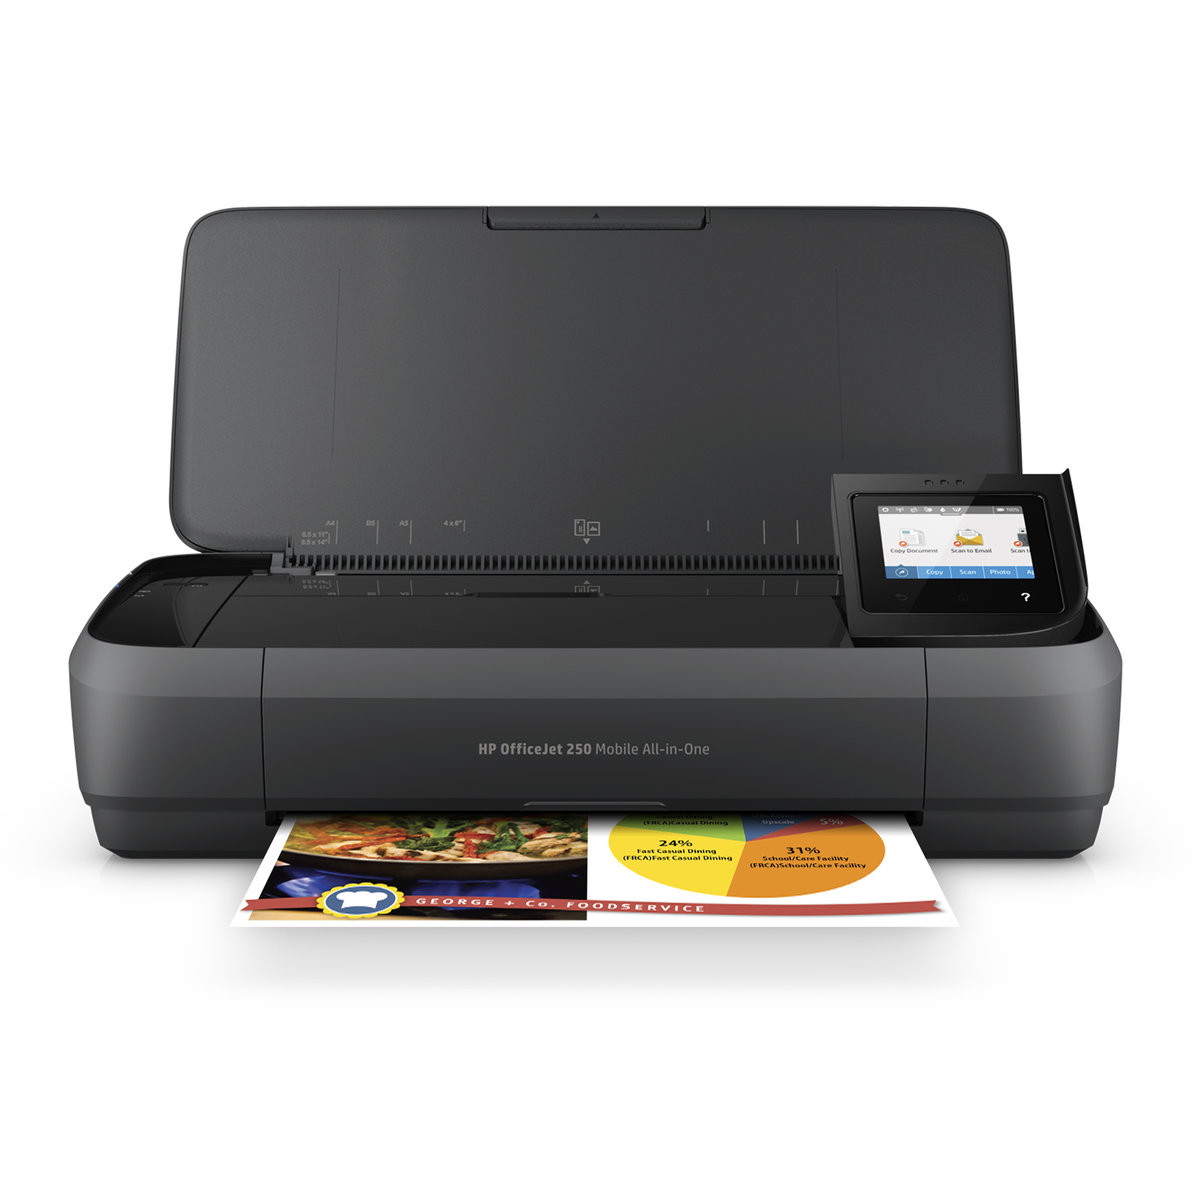 18 Ideal Discount Hardwood Flooring Nashville 2024 free download discount hardwood flooring nashville of hp officejet 250 all in one portable printer with wireless mobile regarding hp officejet 250 all in one portable printer with wireless mobile printing